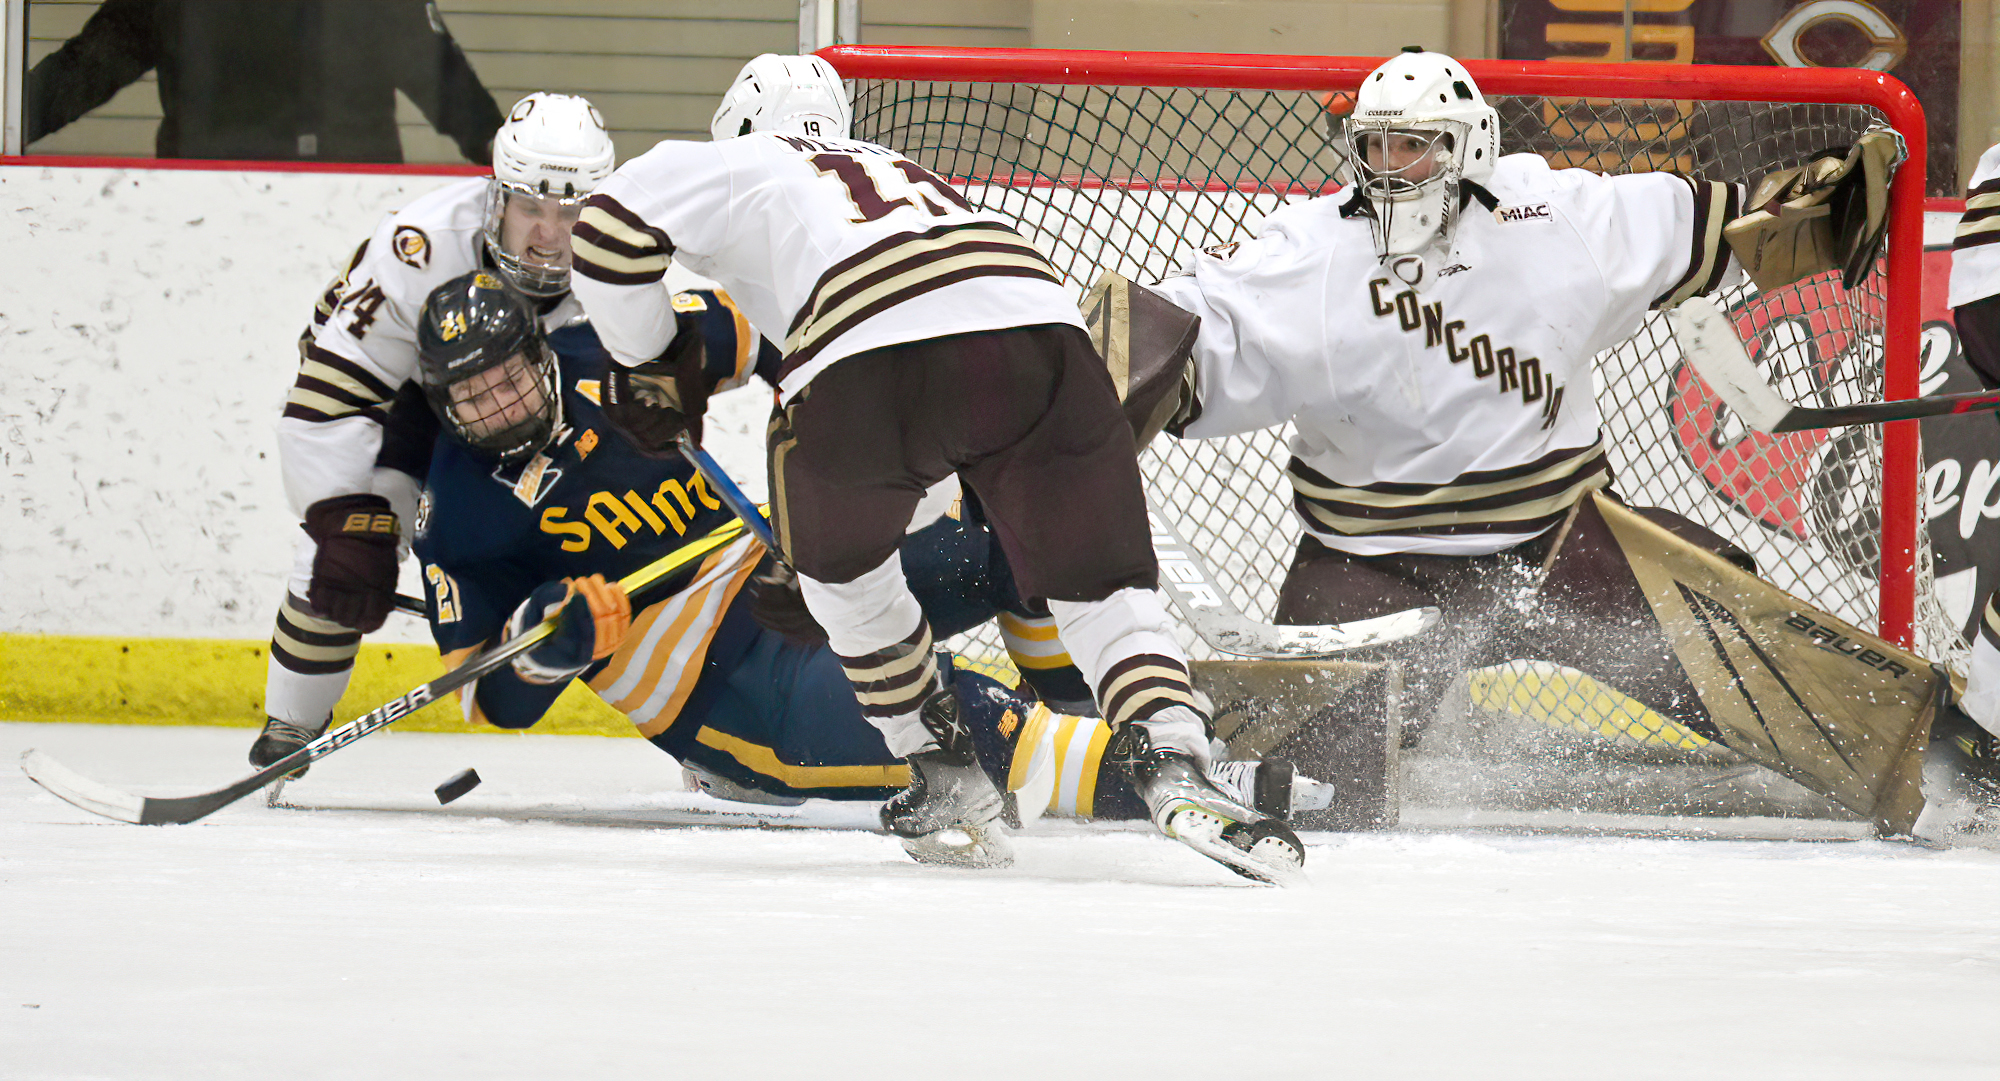 The Cobber defense clears out a St. Scholastica forward after goalie Matt Fitzgerald made a huge save in the final minute of play in CC's 2-1 win.